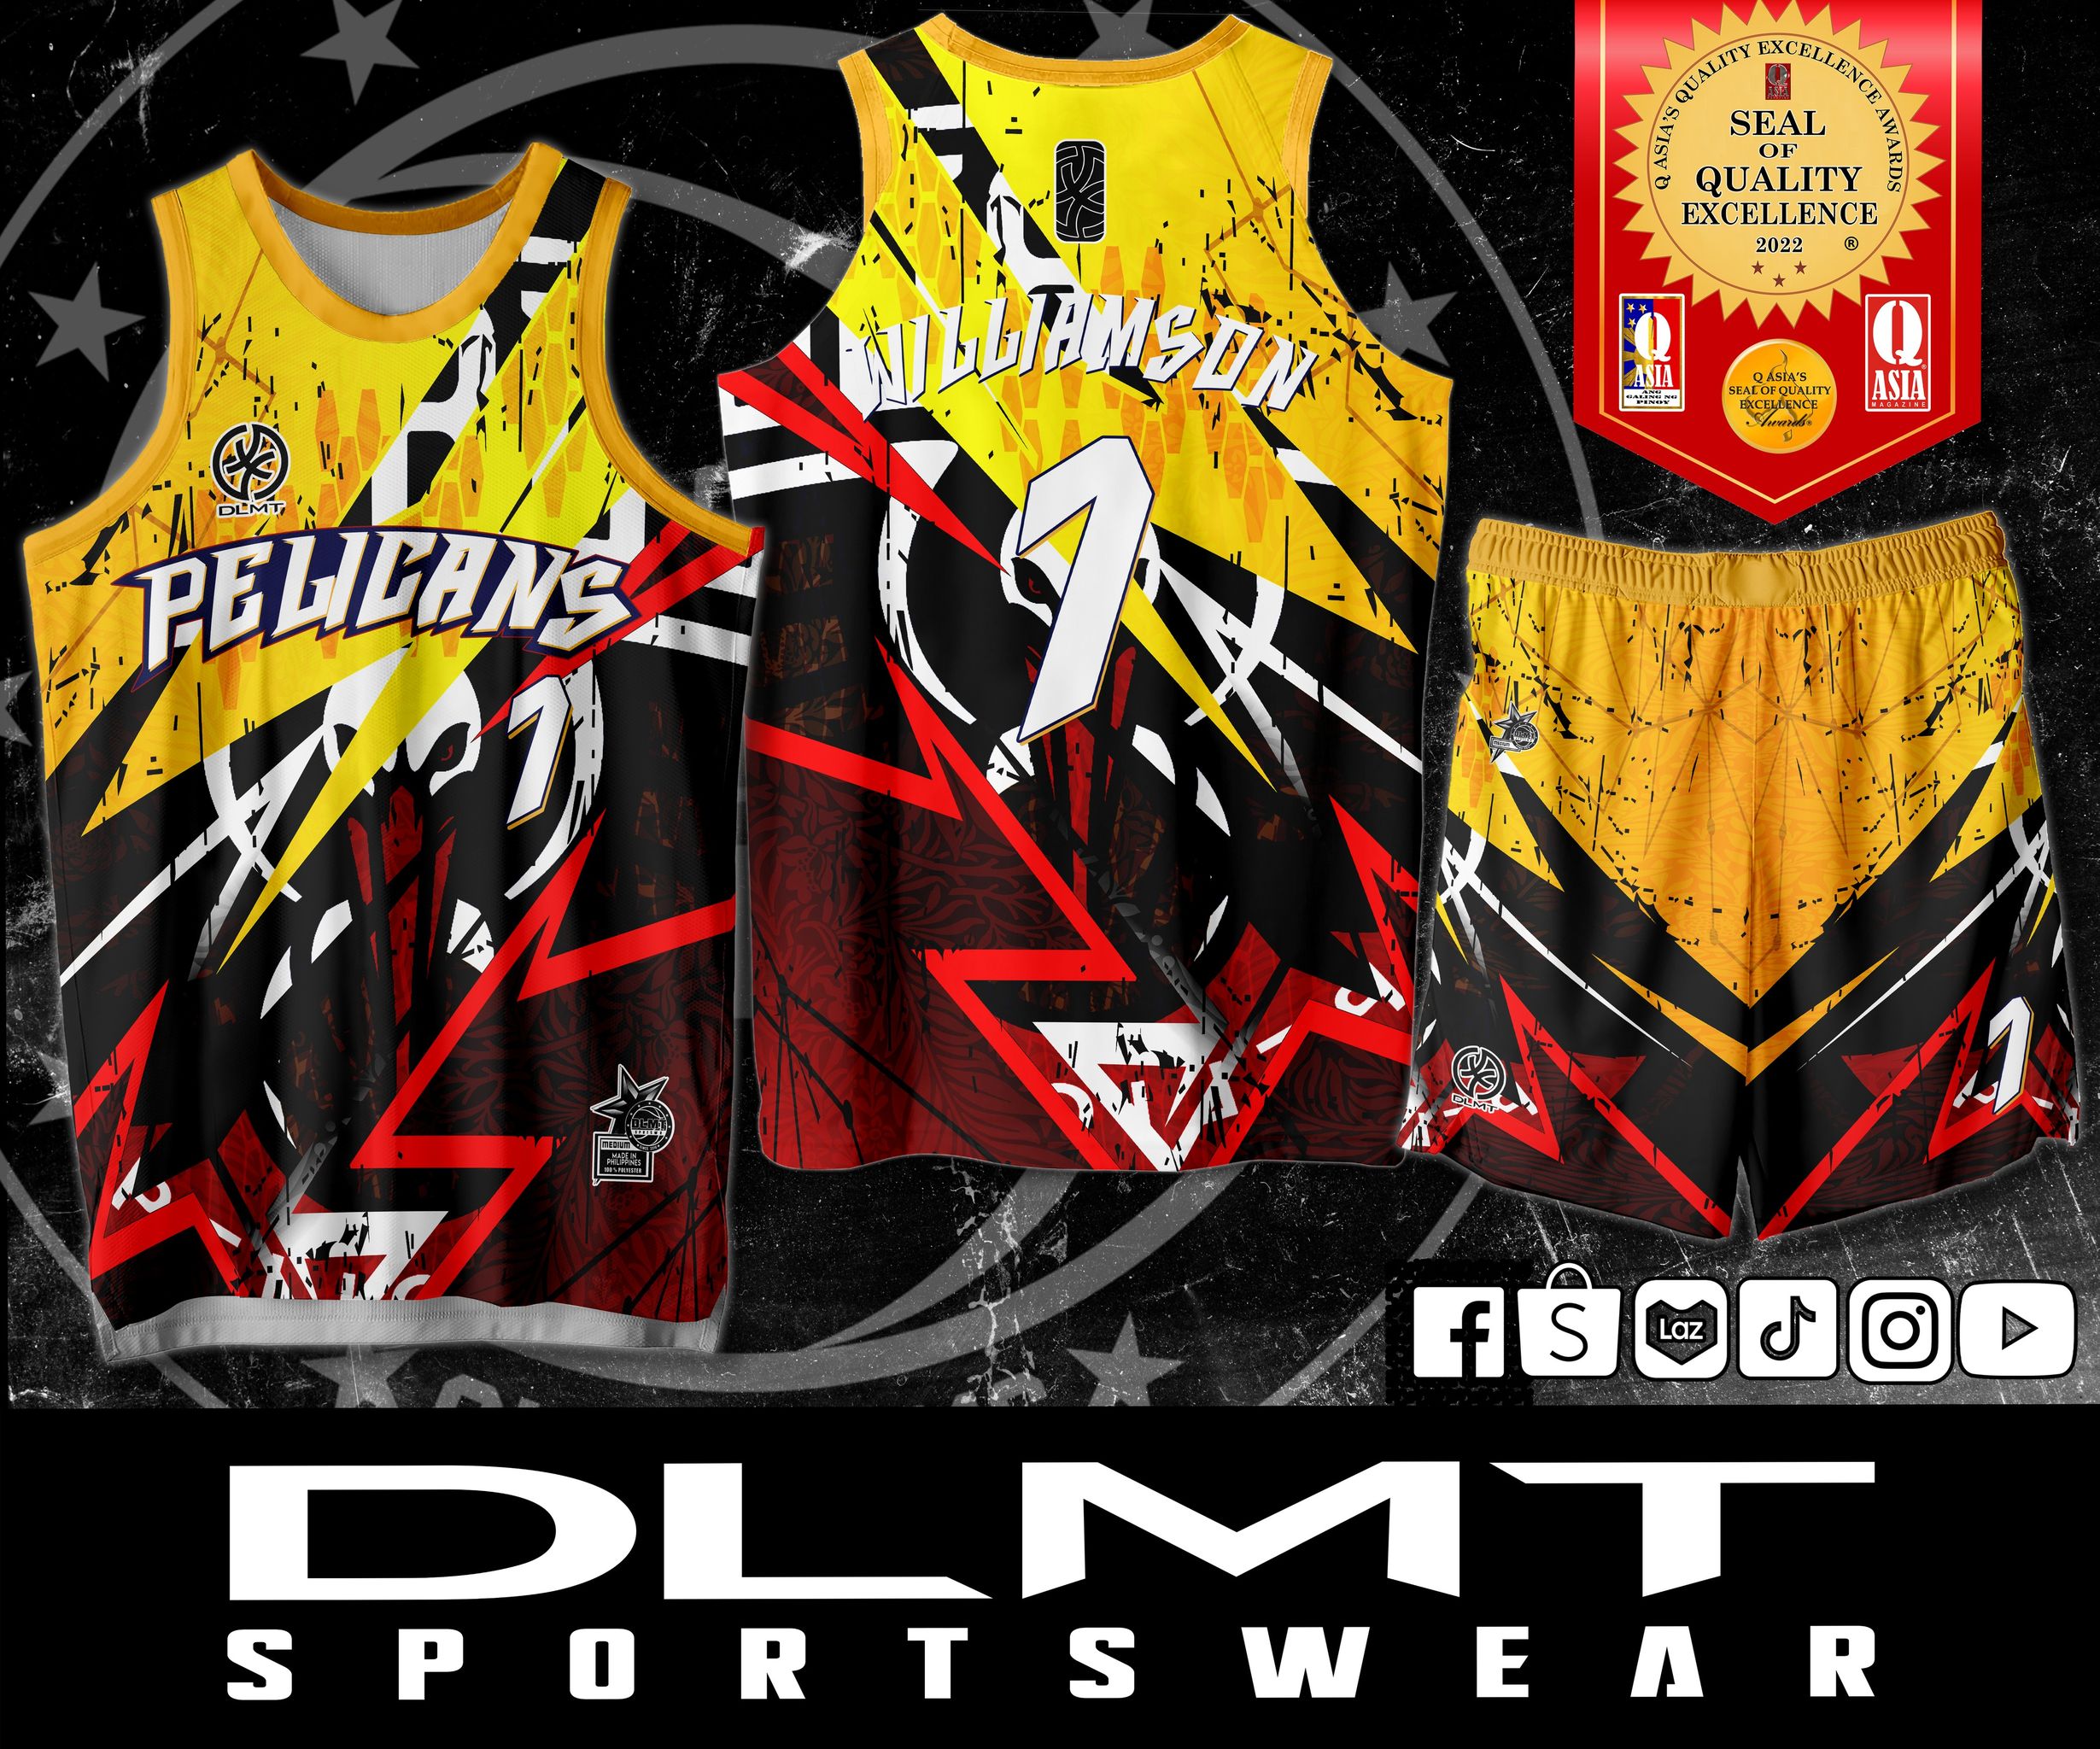 Got my fake SGA jersey for $ 10(500php)! [sublimated jersey